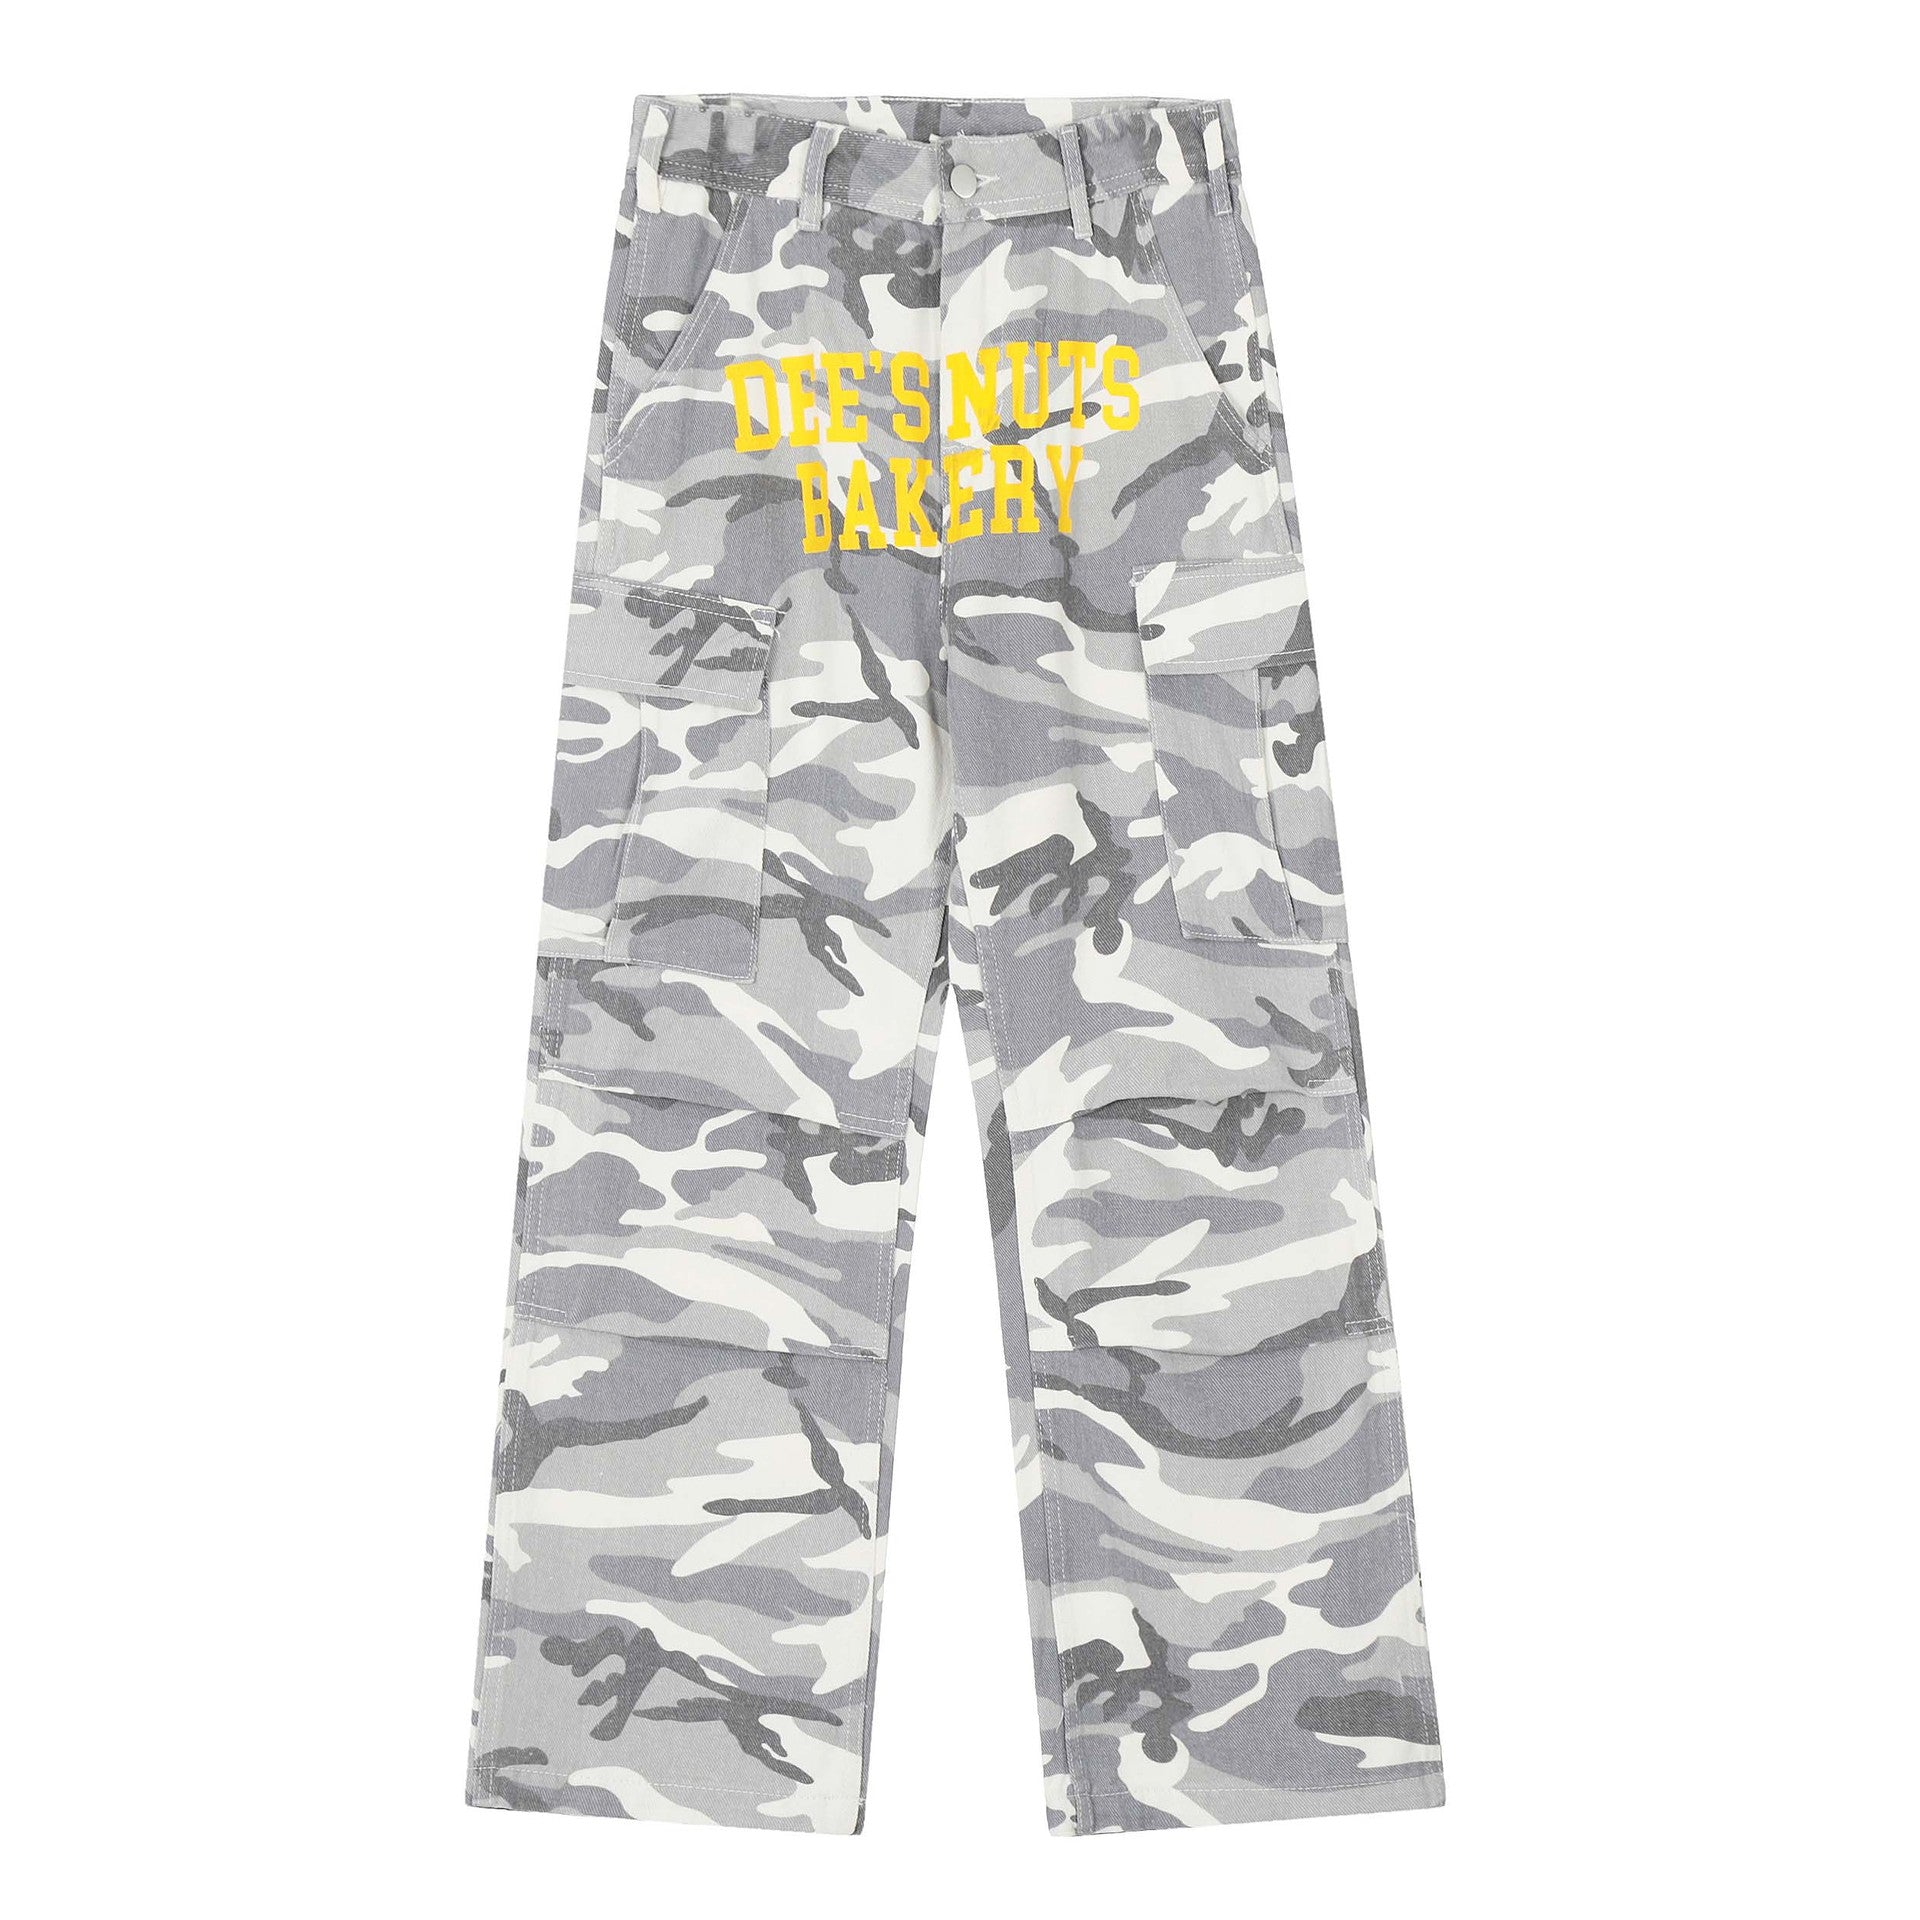 The Supermade American Monogrammed Camouflage Pants - 1693